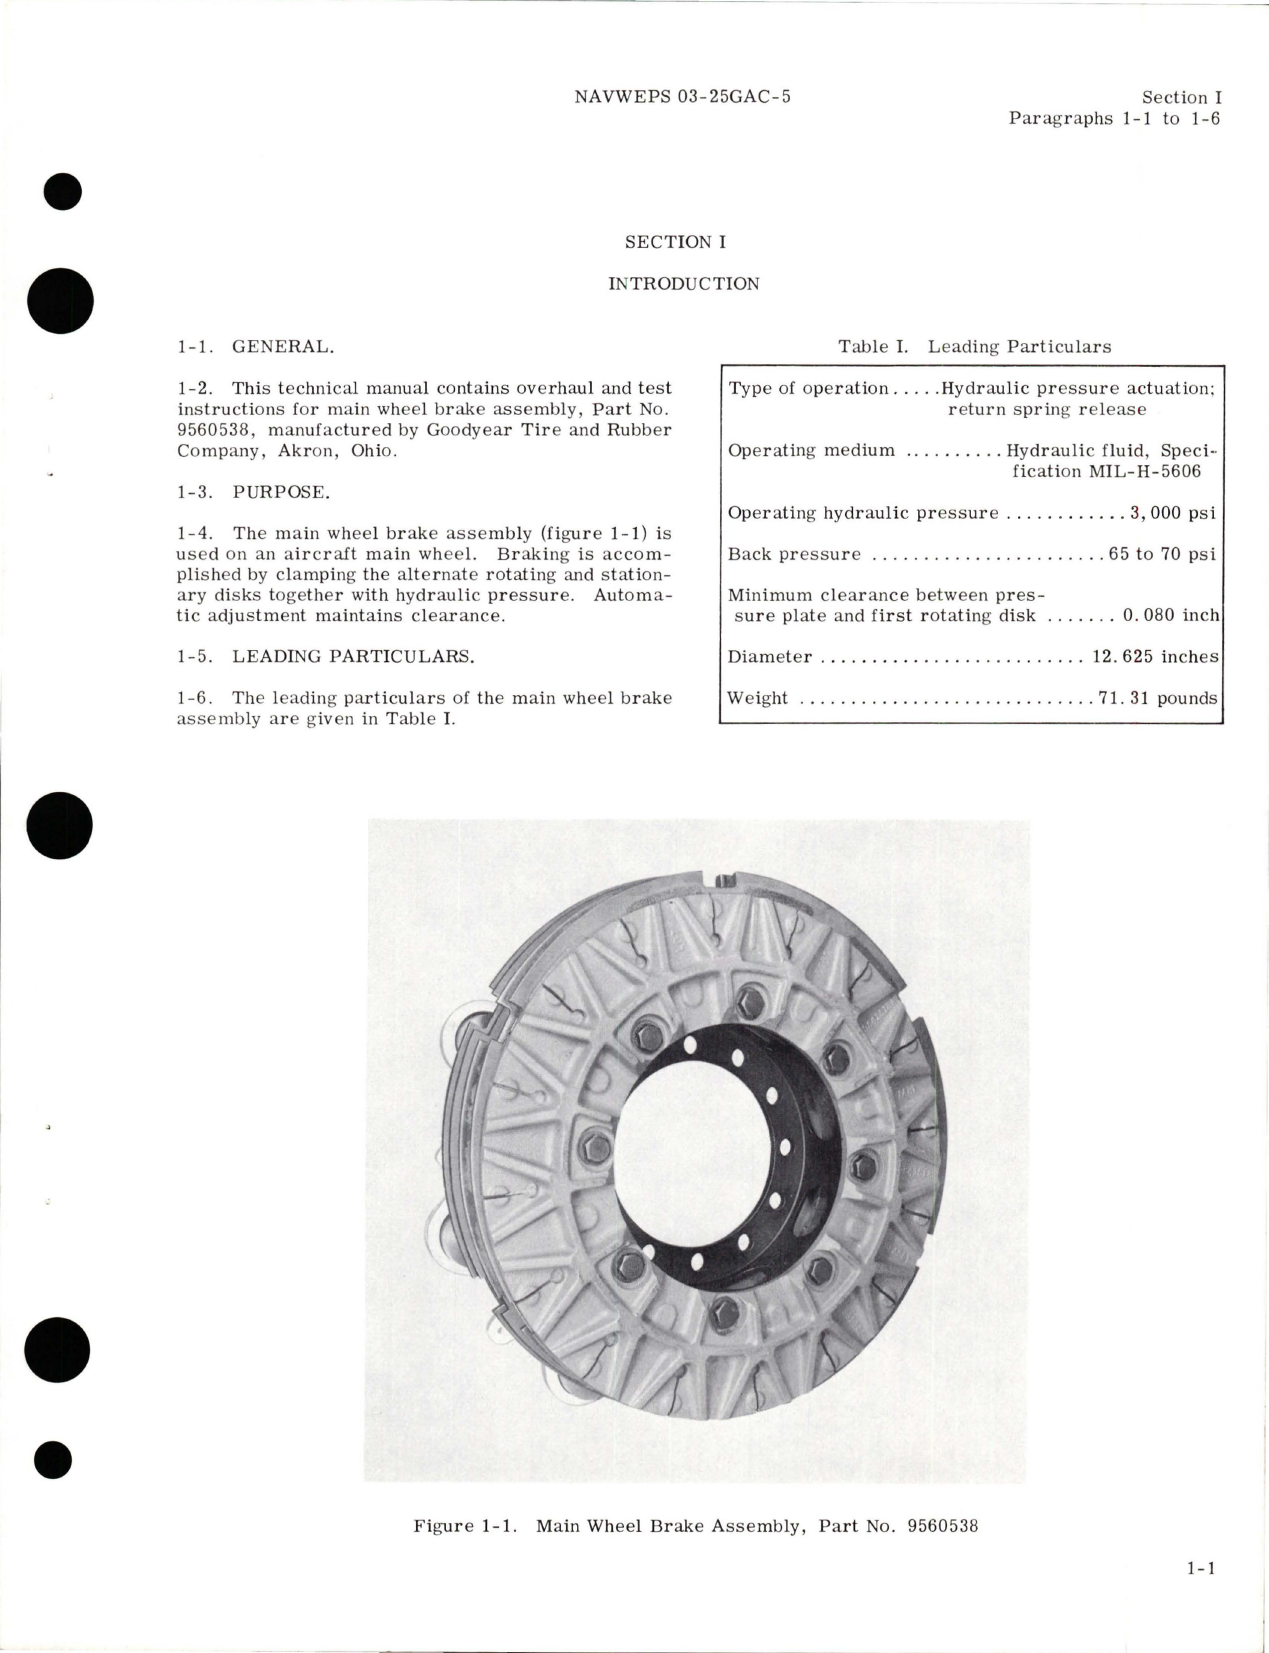 Sample page 5 from AirCorps Library document: Overhaul Instructions for Main Wheel Brake Assembly - Part 9560538